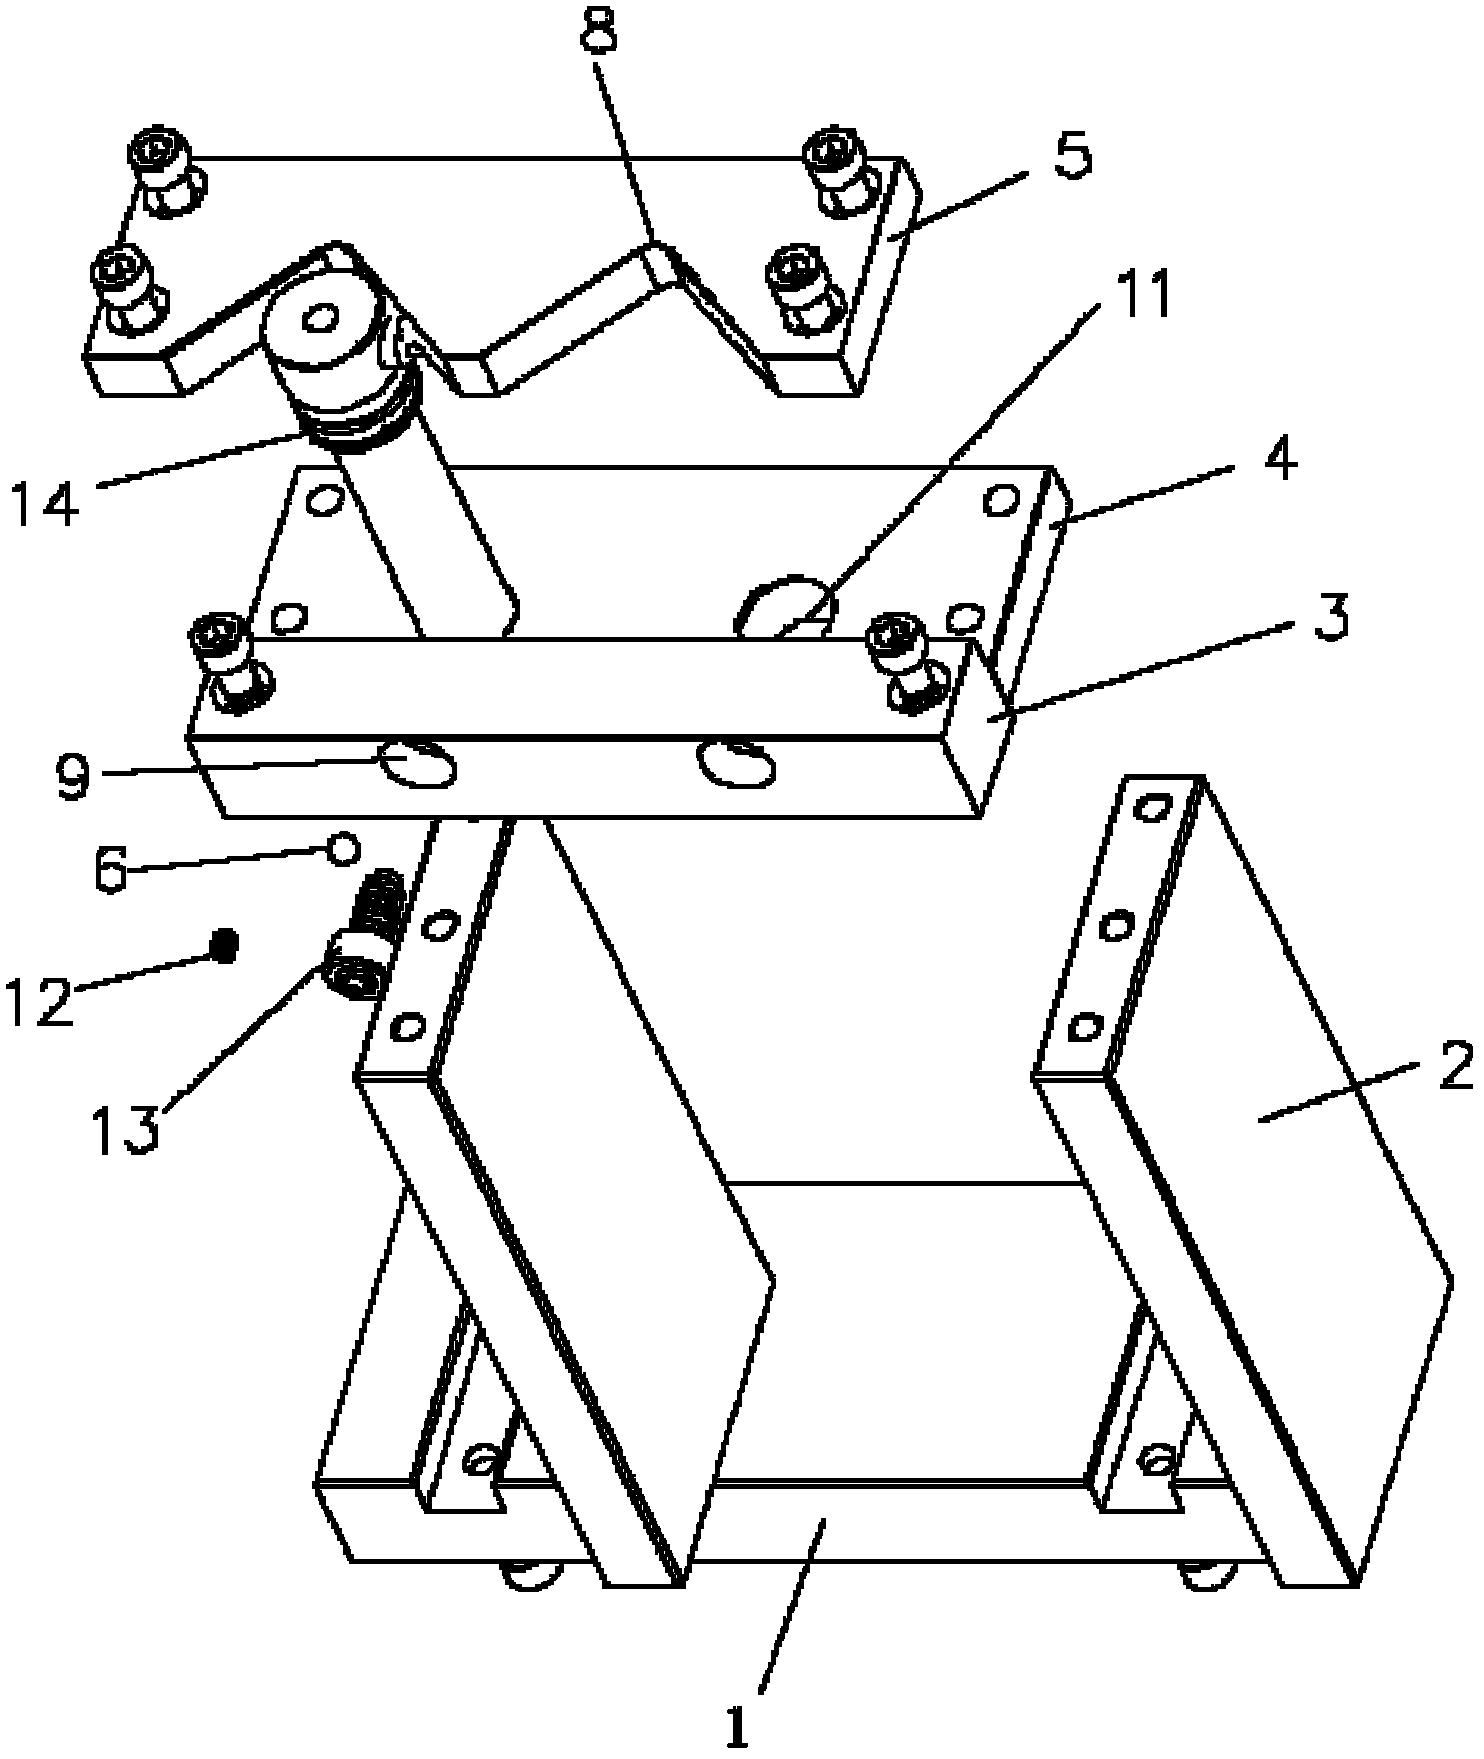 Jig for detecting concentricity of jet nozzle